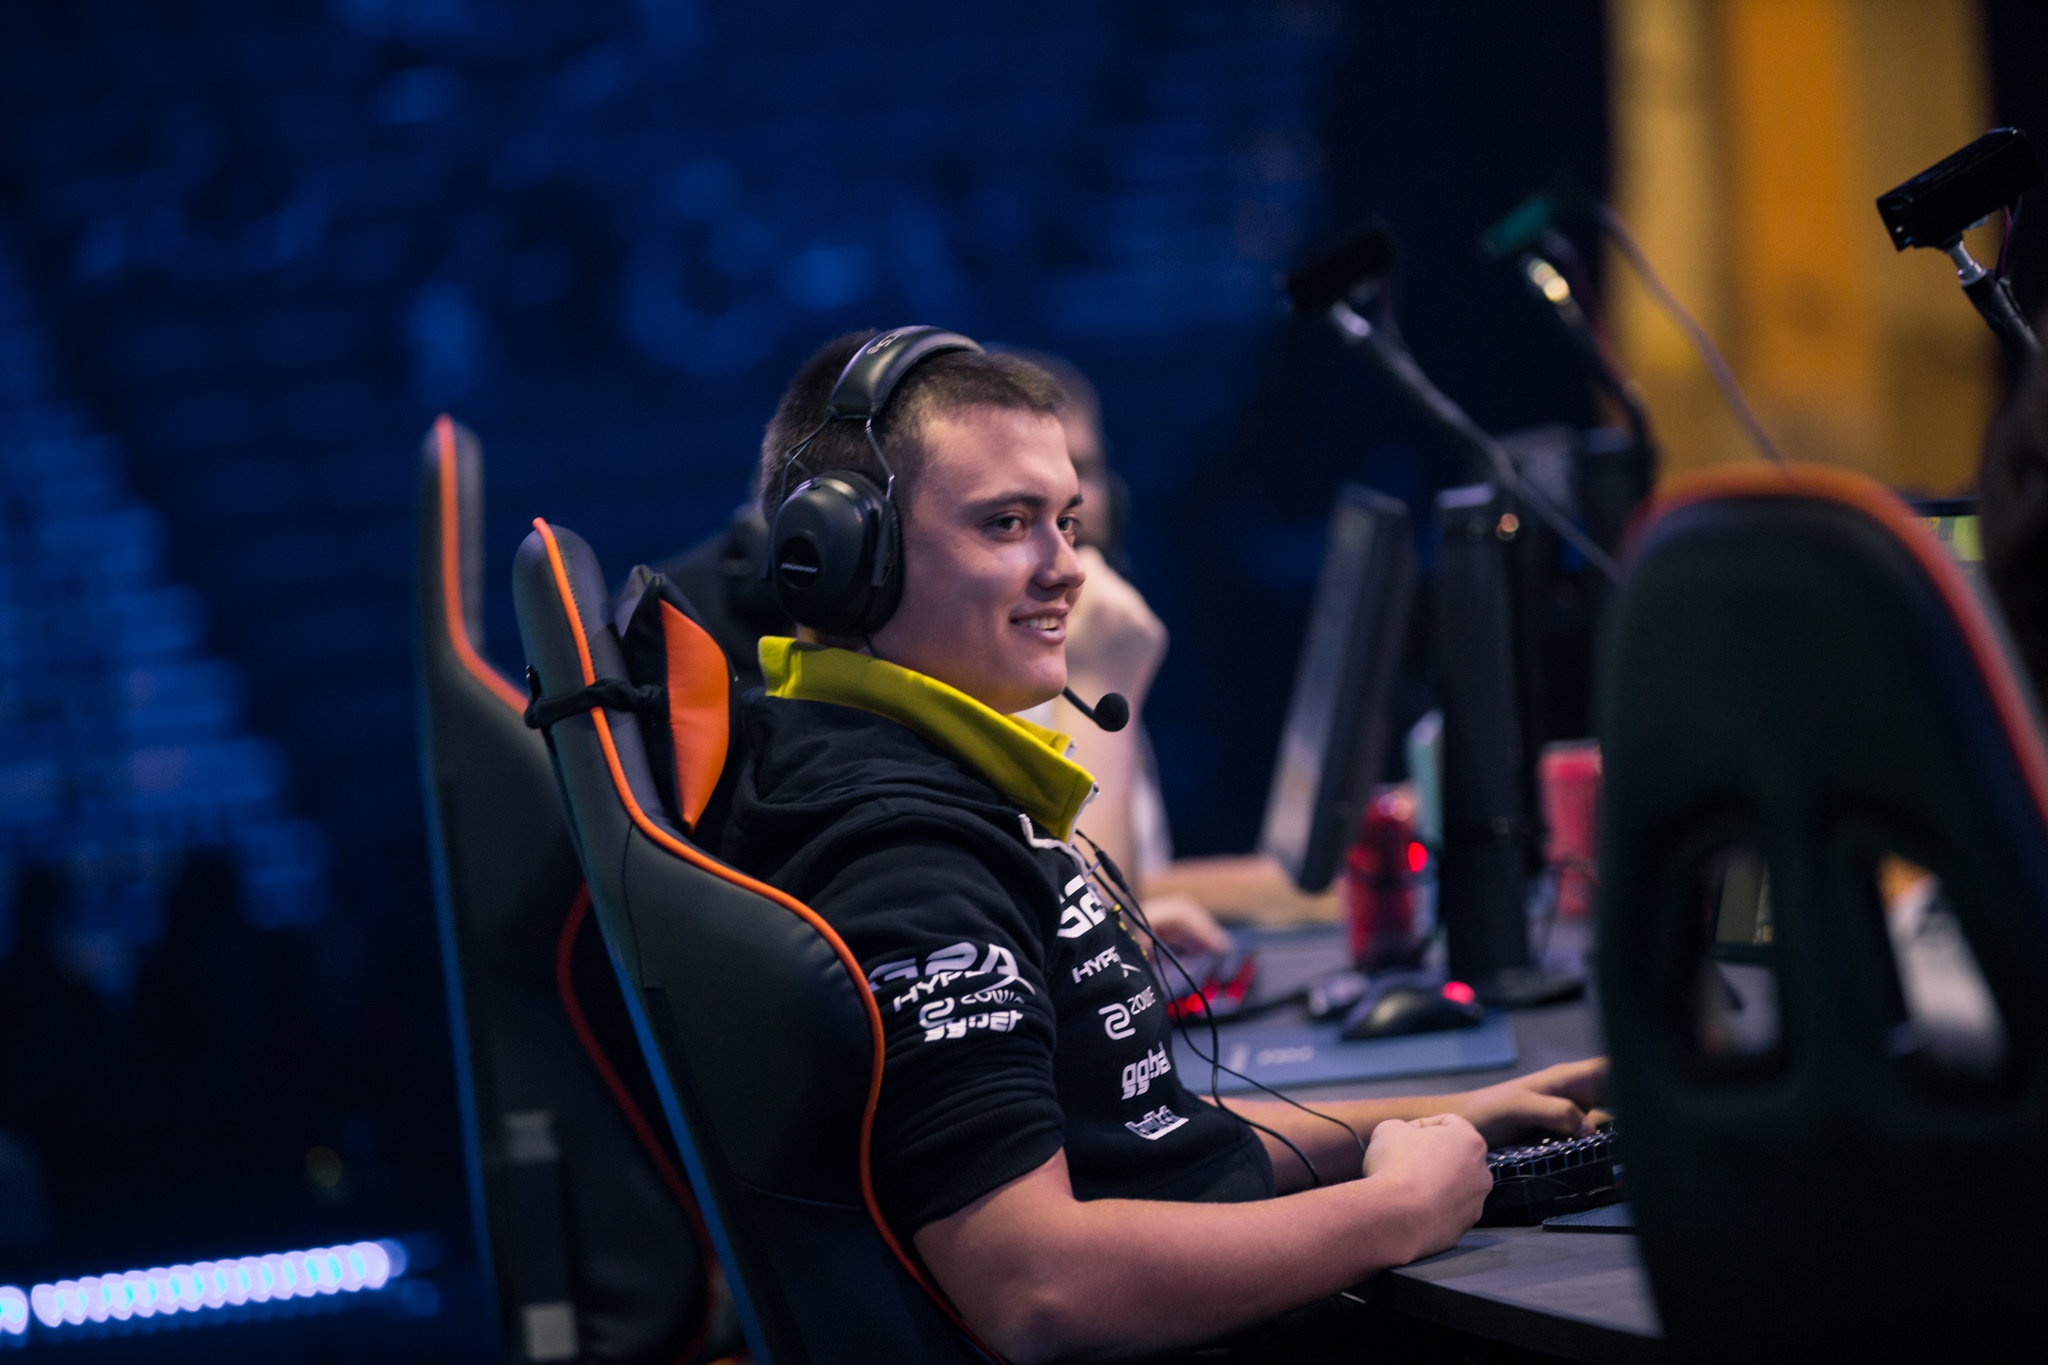 Flamie and S1mple to play for Ninjas in Pyjamas in ECS today.